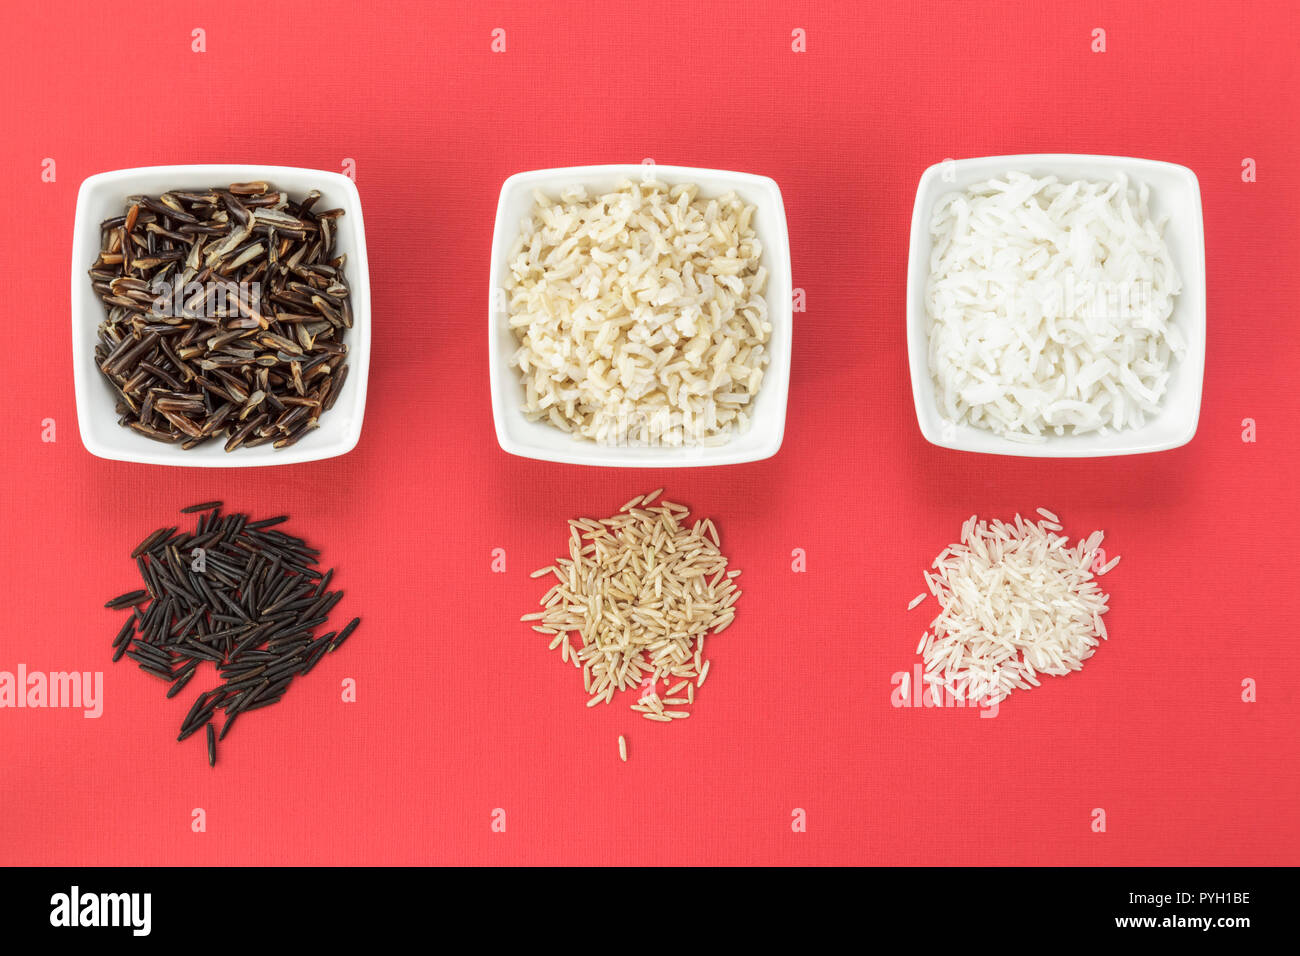 Cooked and uncooked wild, brown and white rice on red background Stock Photo